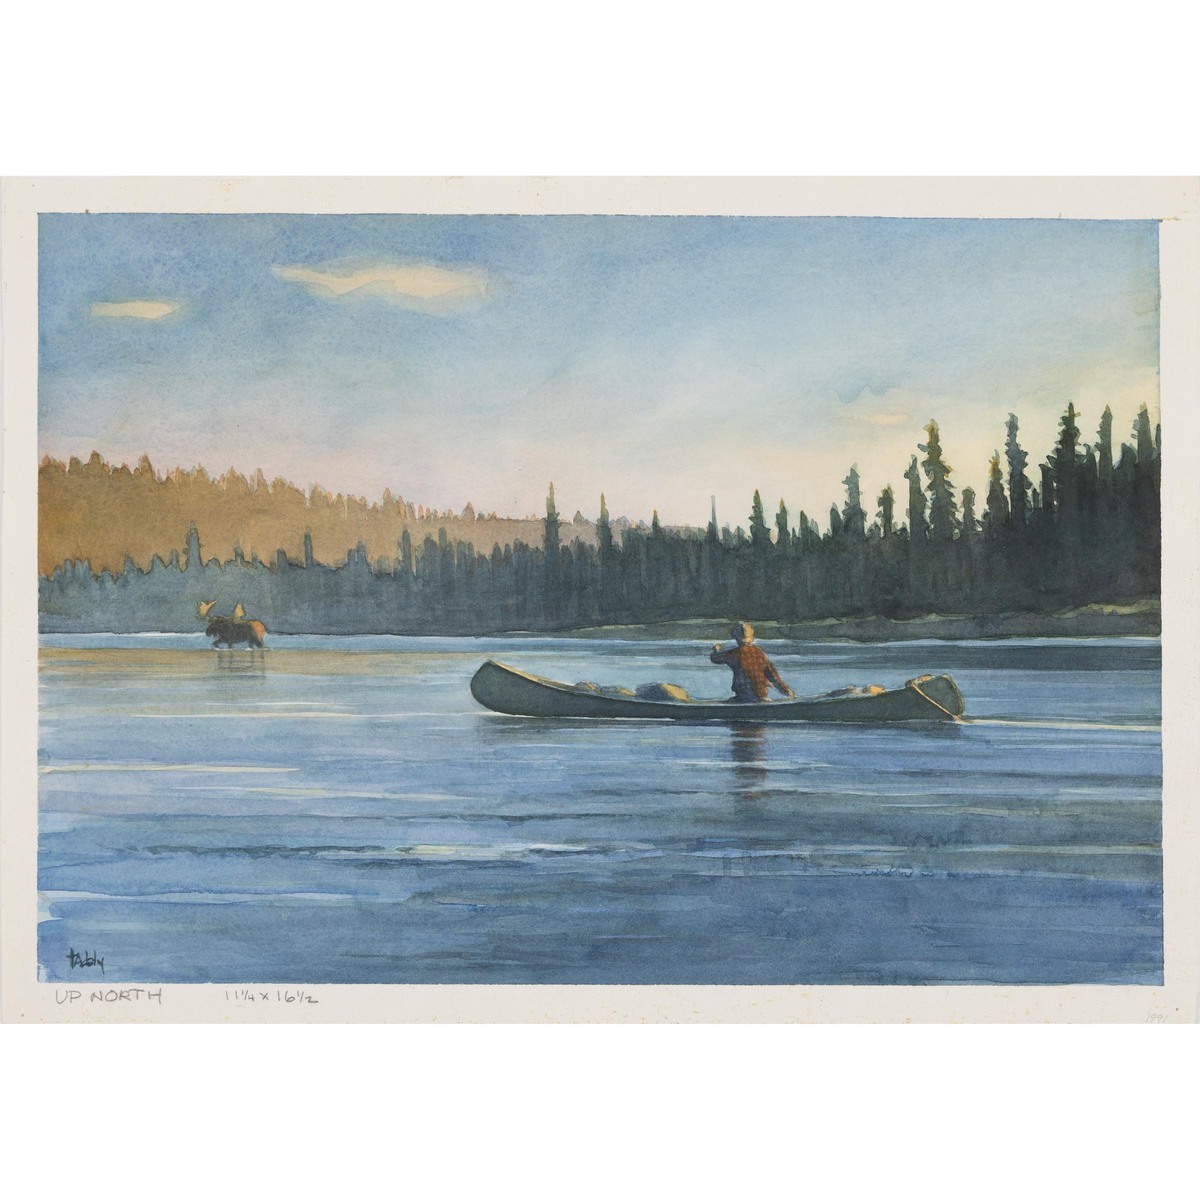 THOMAS AQUINAS DALY (b. 1937), CANOE AND MOOSE, signed lower left, sight 11 x 16 in — 27.9 x 40.6 cm - Image 2 of 3